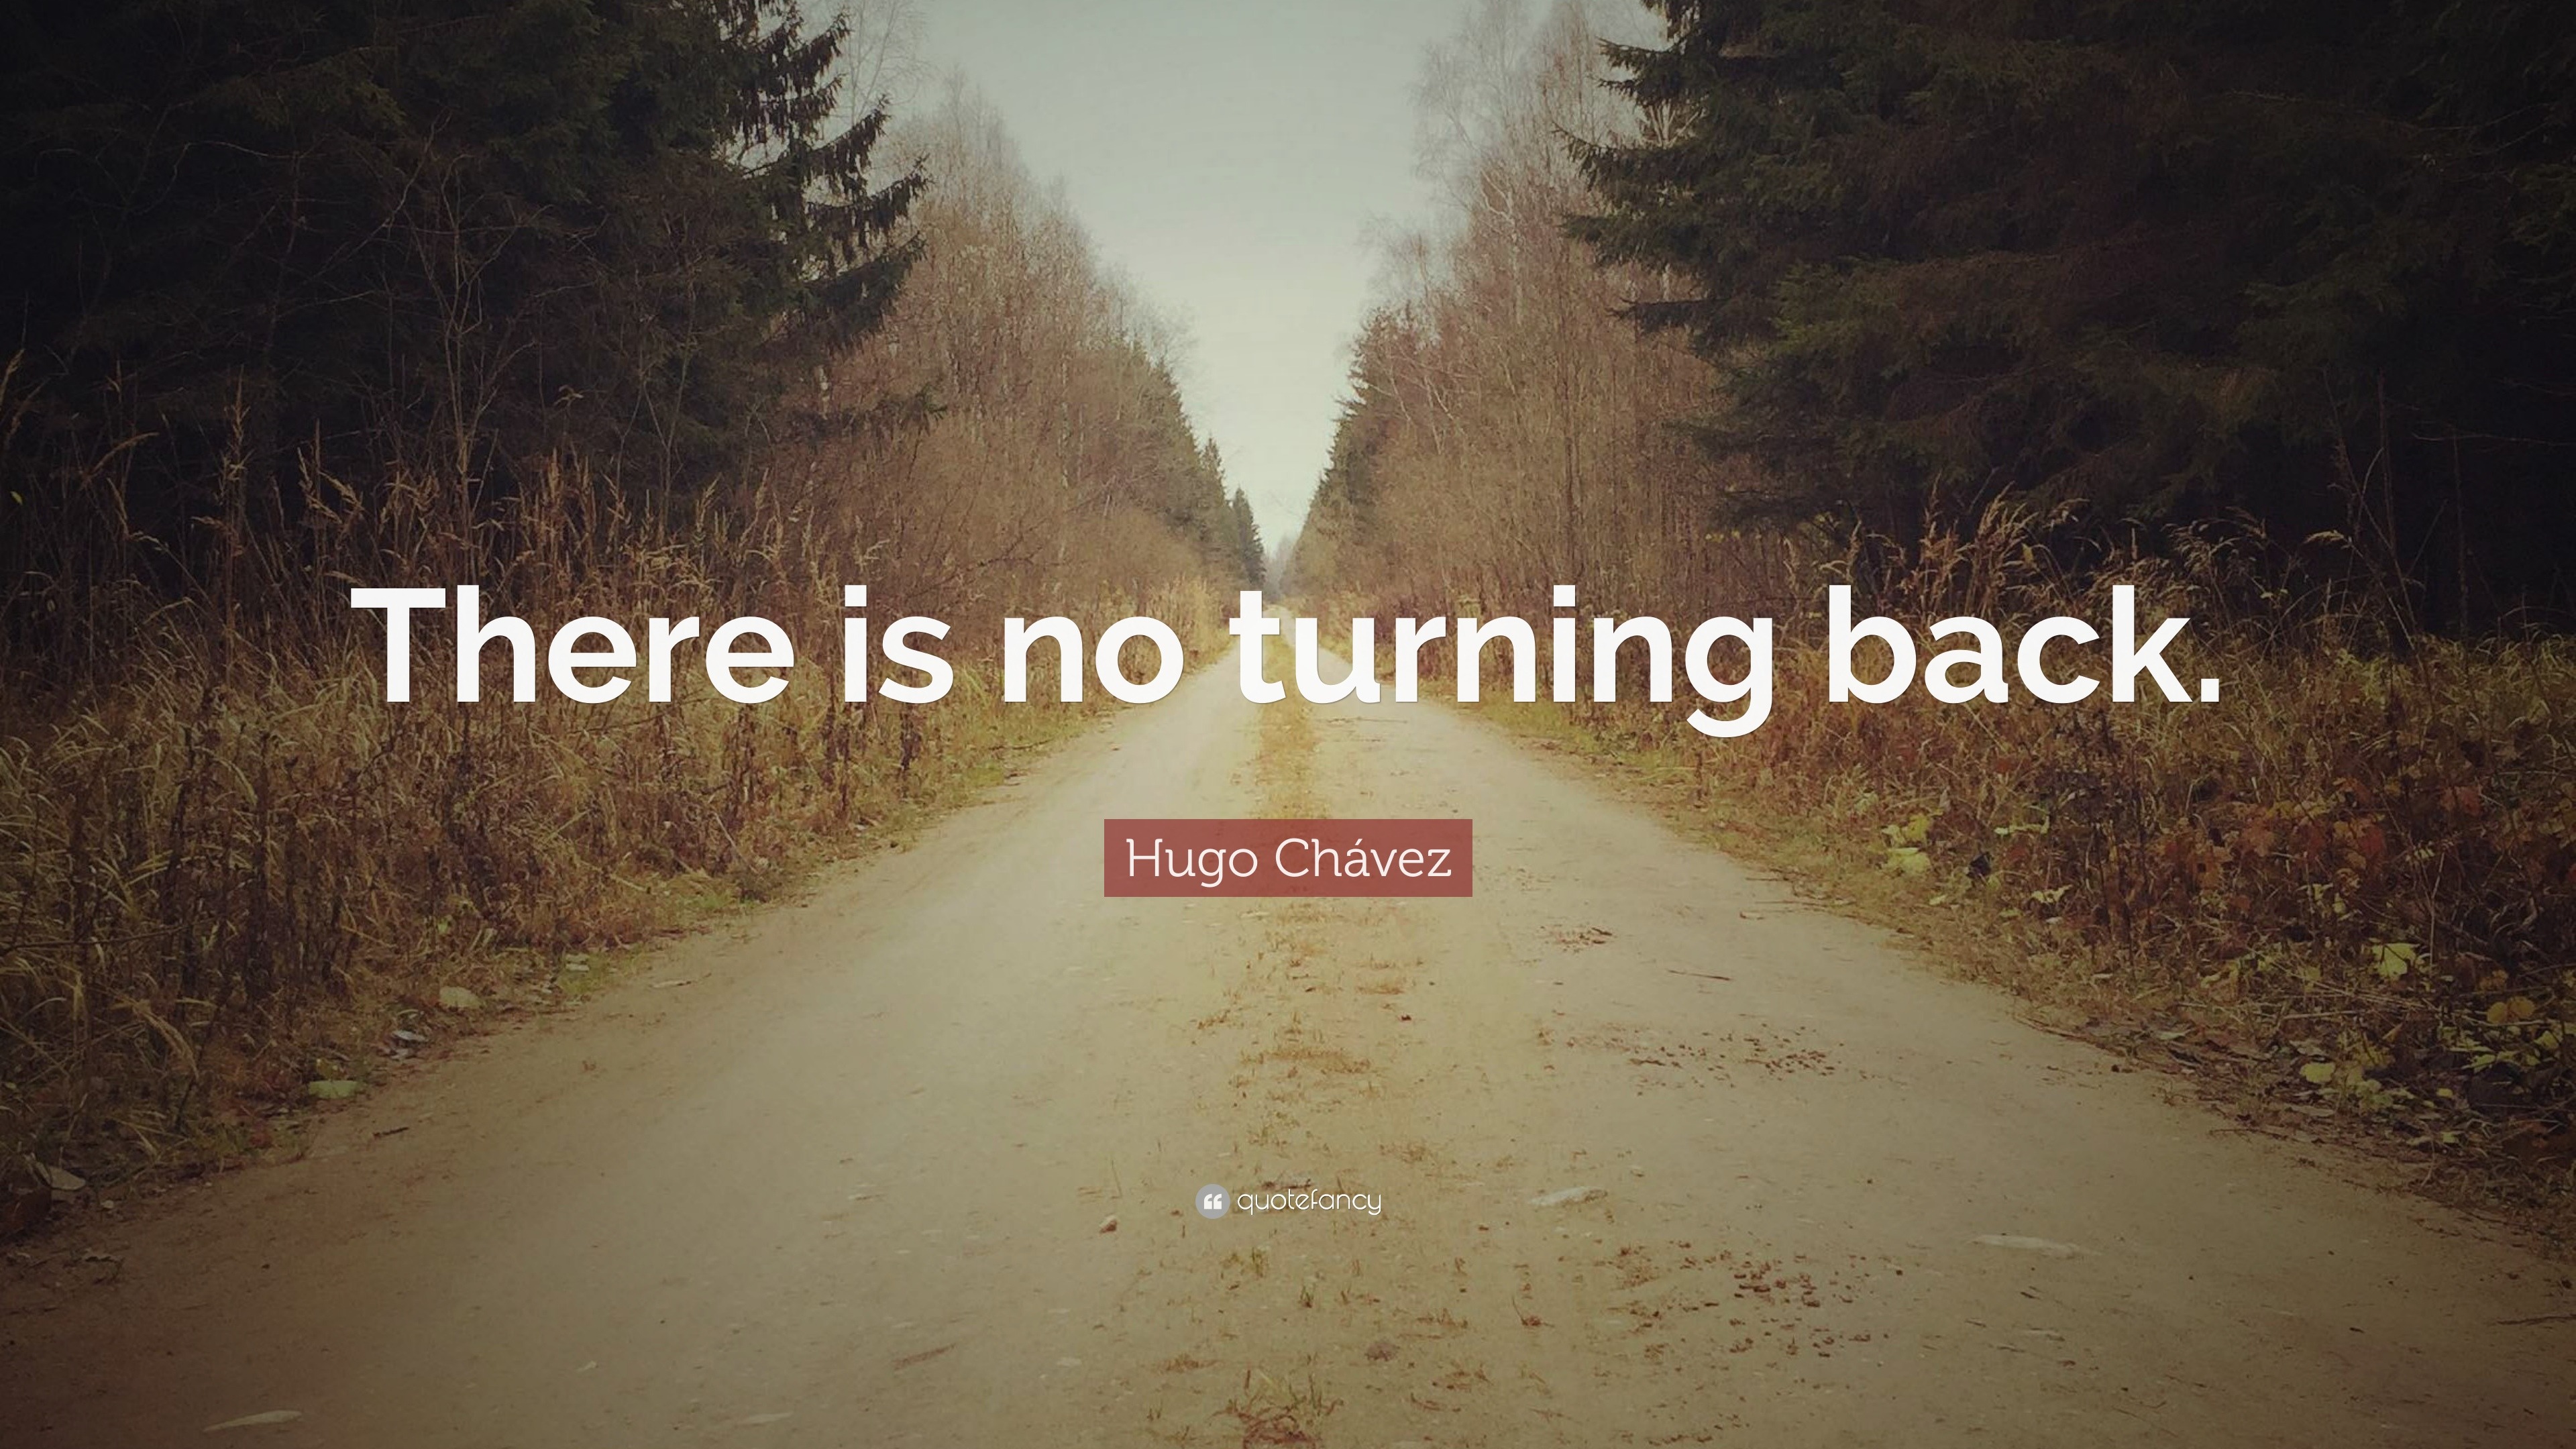 Hugo Chávez Quote: "There is no turning back."